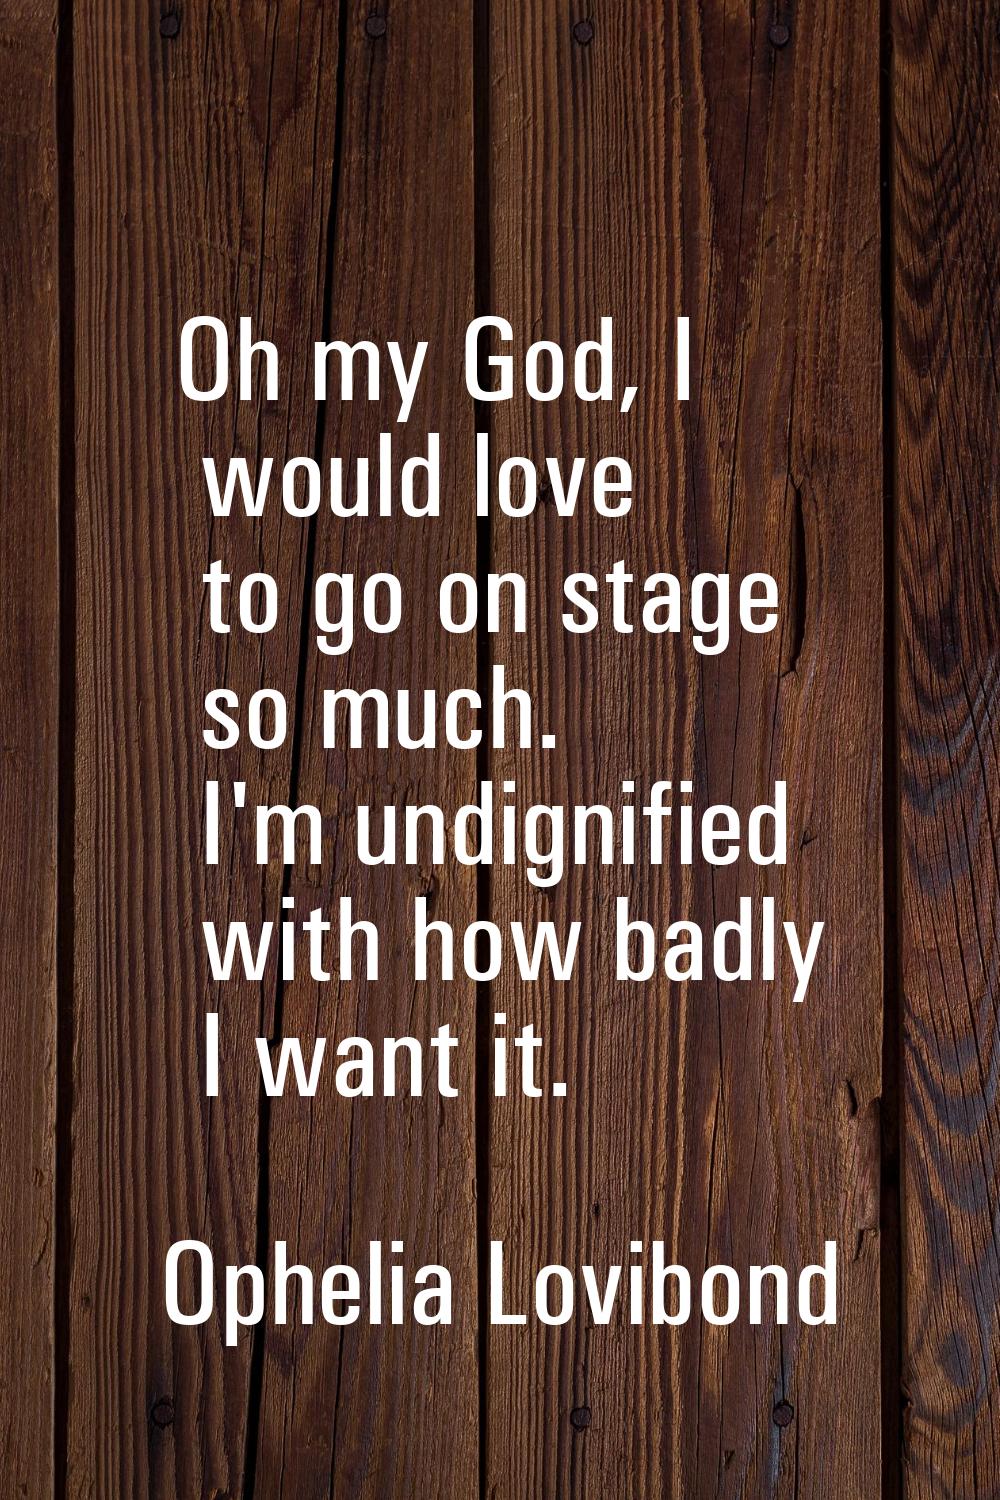 Oh my God, I would love to go on stage so much. I'm undignified with how badly I want it.